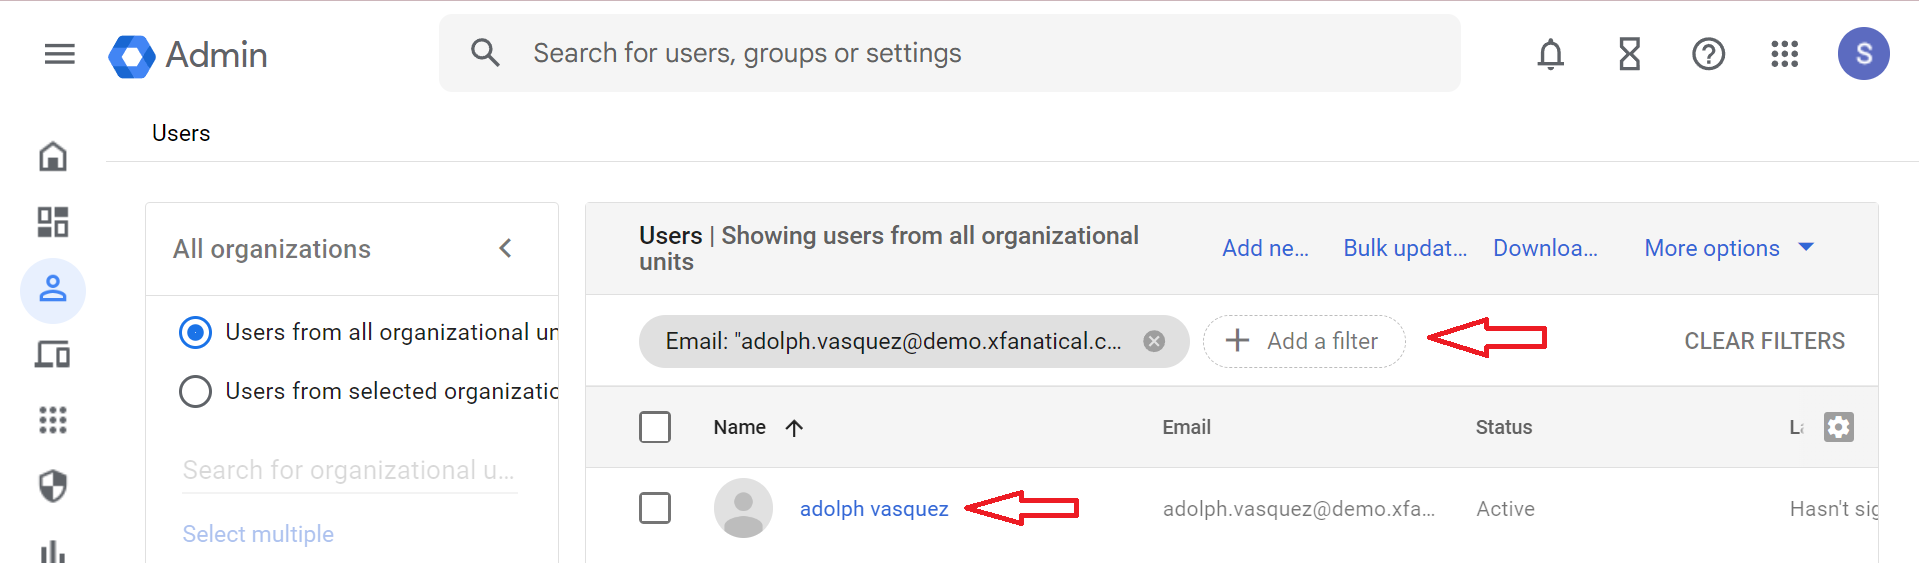 Verify it from the Google admin console